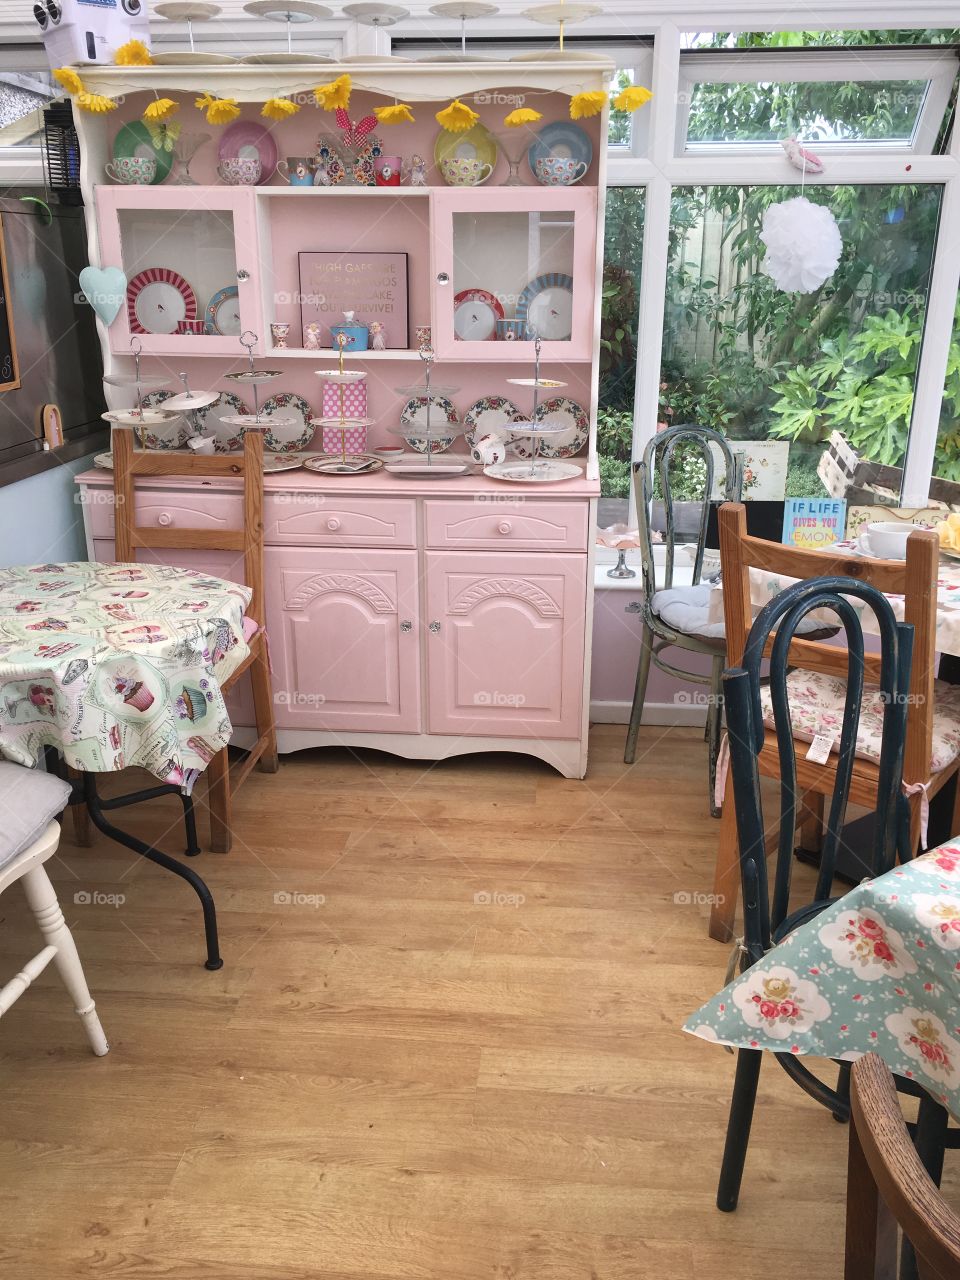 Pretty pink dresser with tables and chairs in a vintage chic style inside a tearoom in summer 